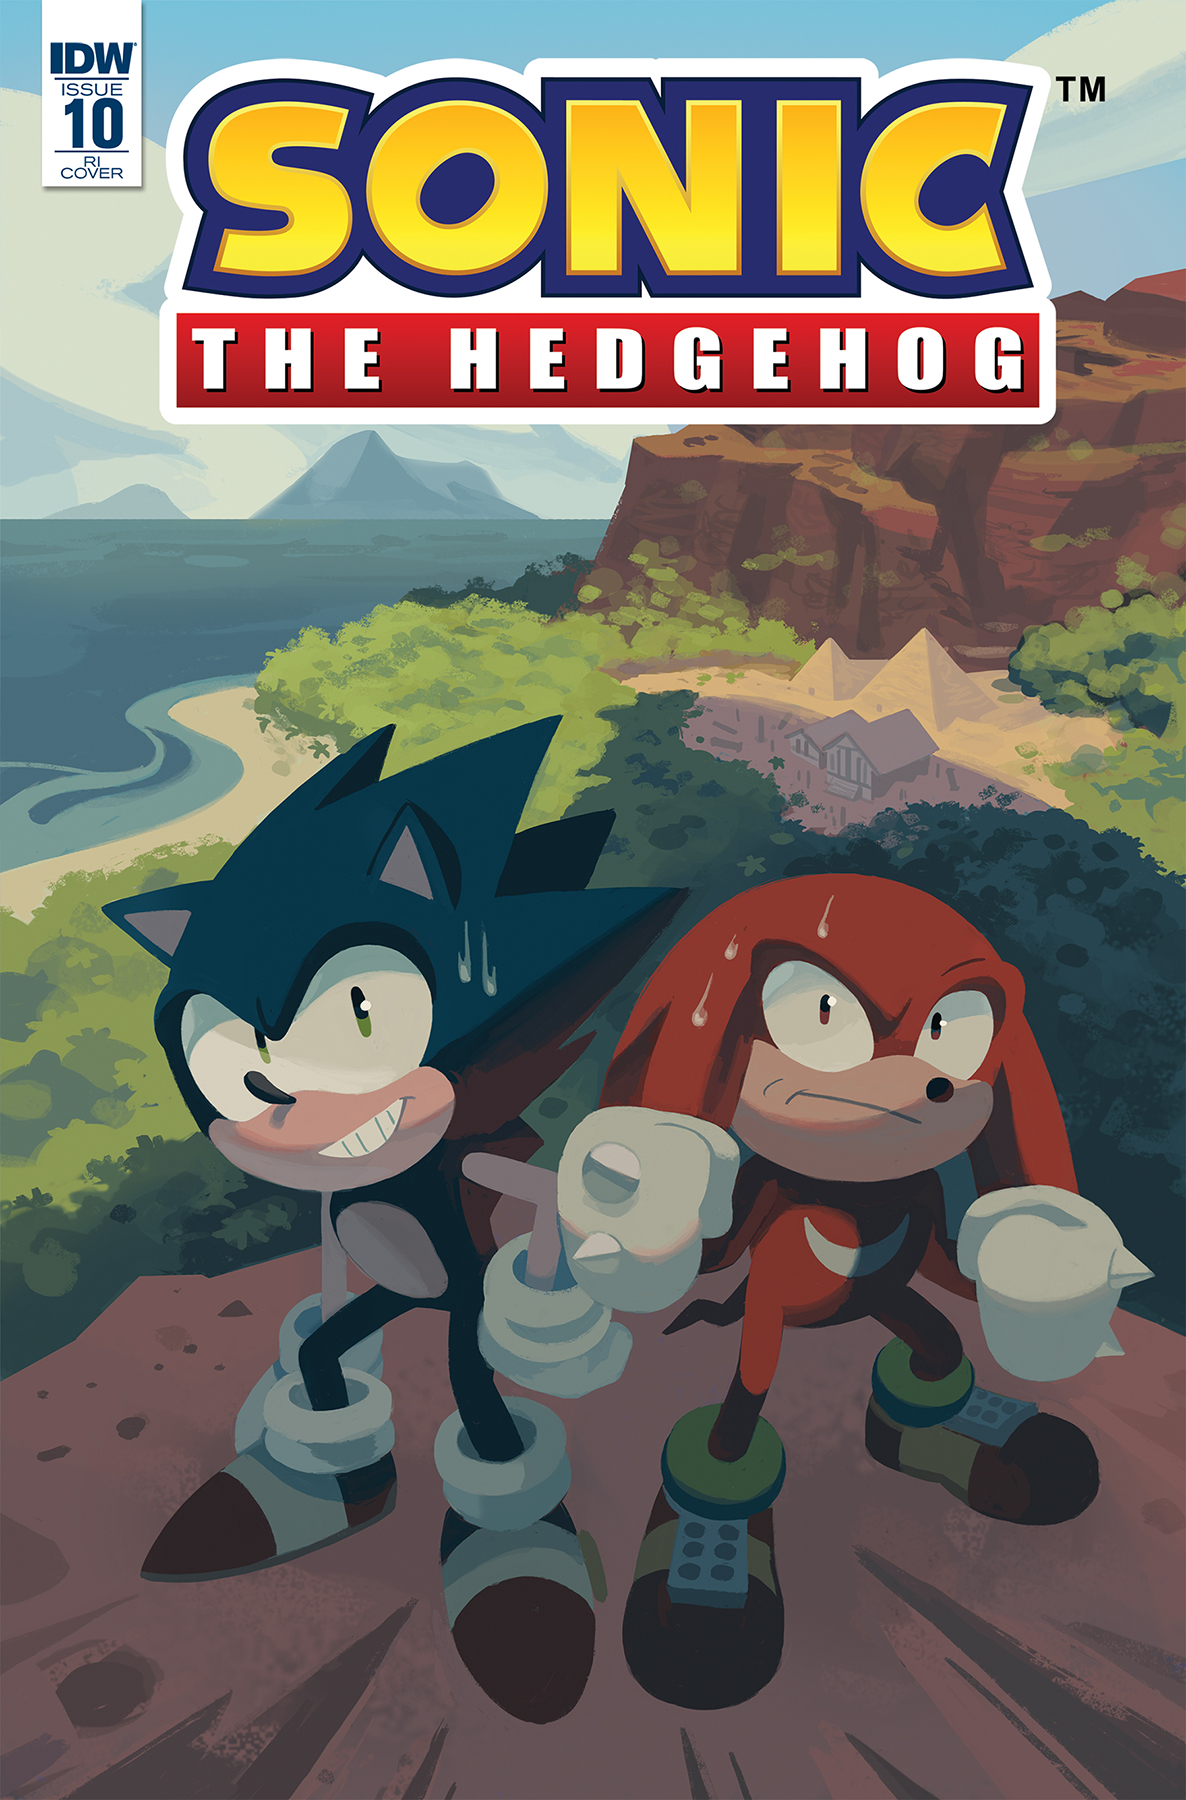 [idw-sonic minirant] reuse of art and lazy covers by Nintrendodude on DeviantArt